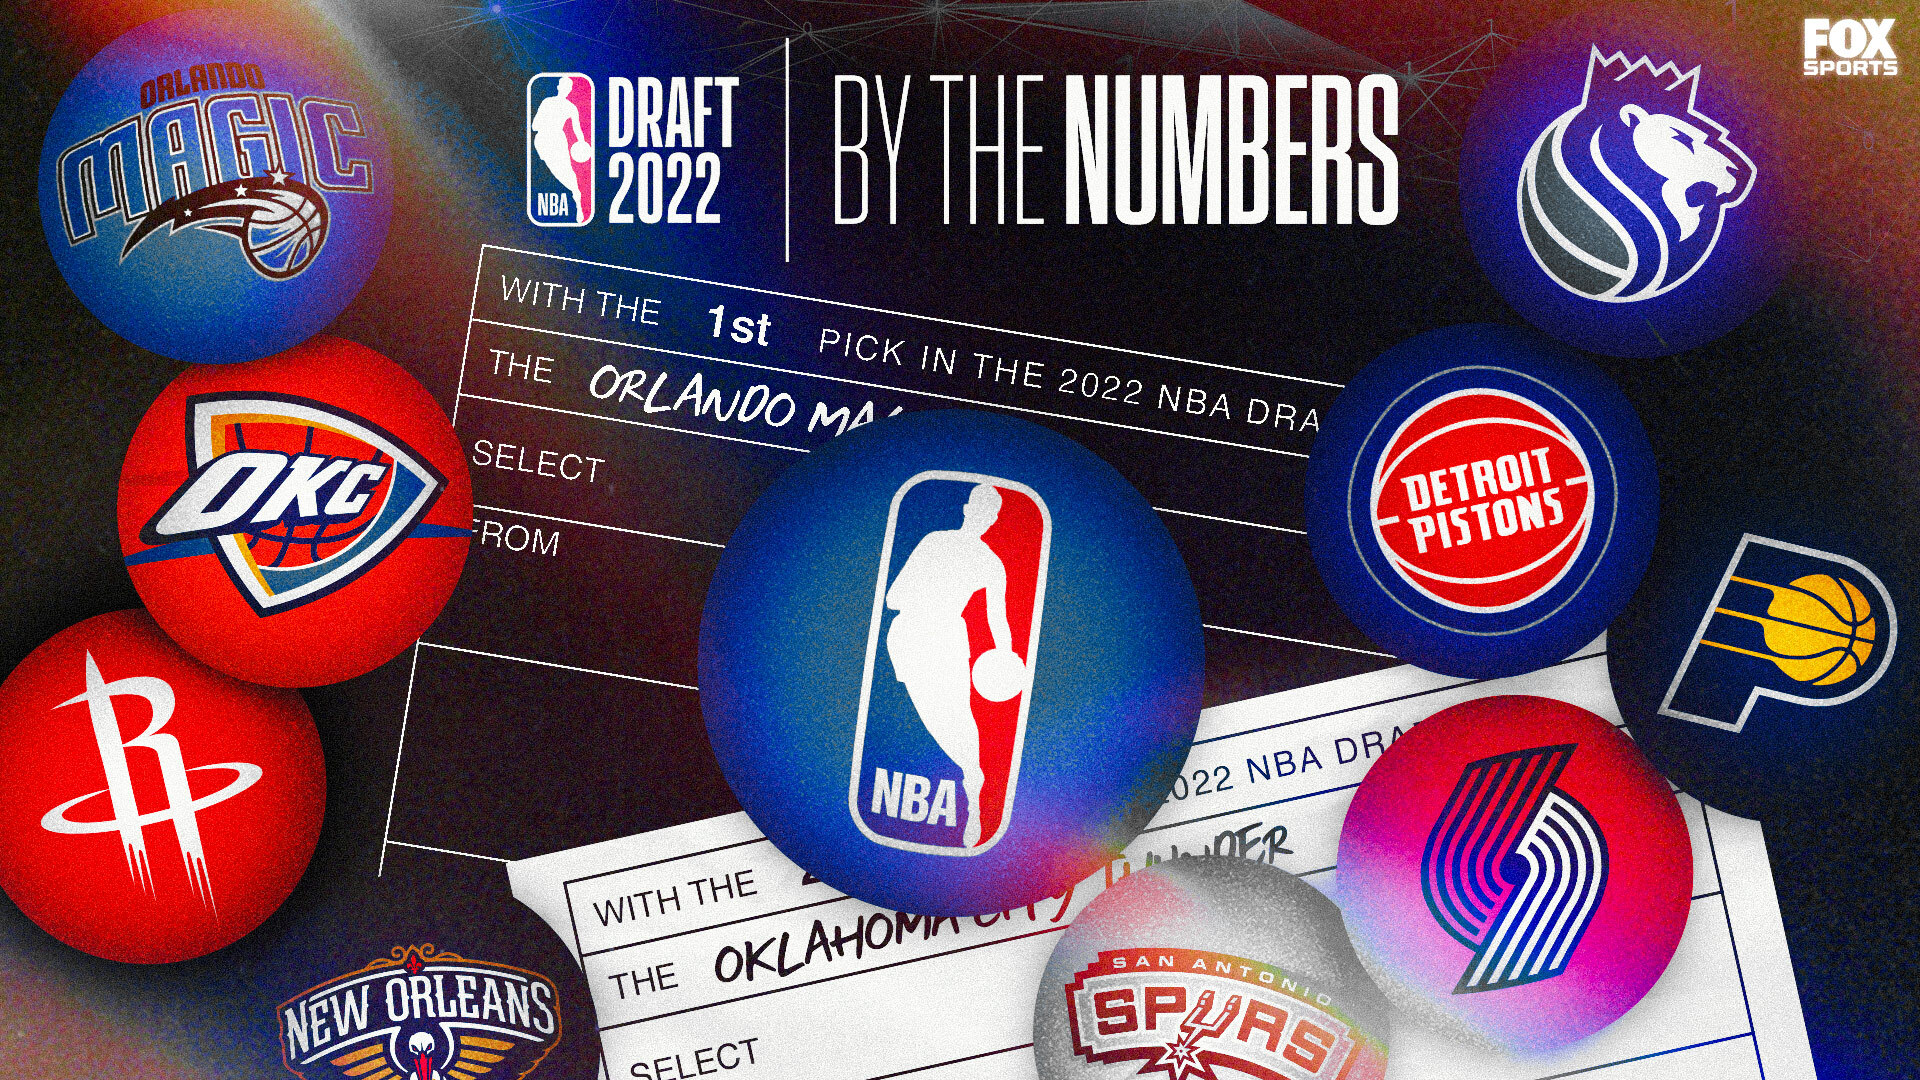 NBA Draft 2022: By the Numbers - BarstwoolSports.com